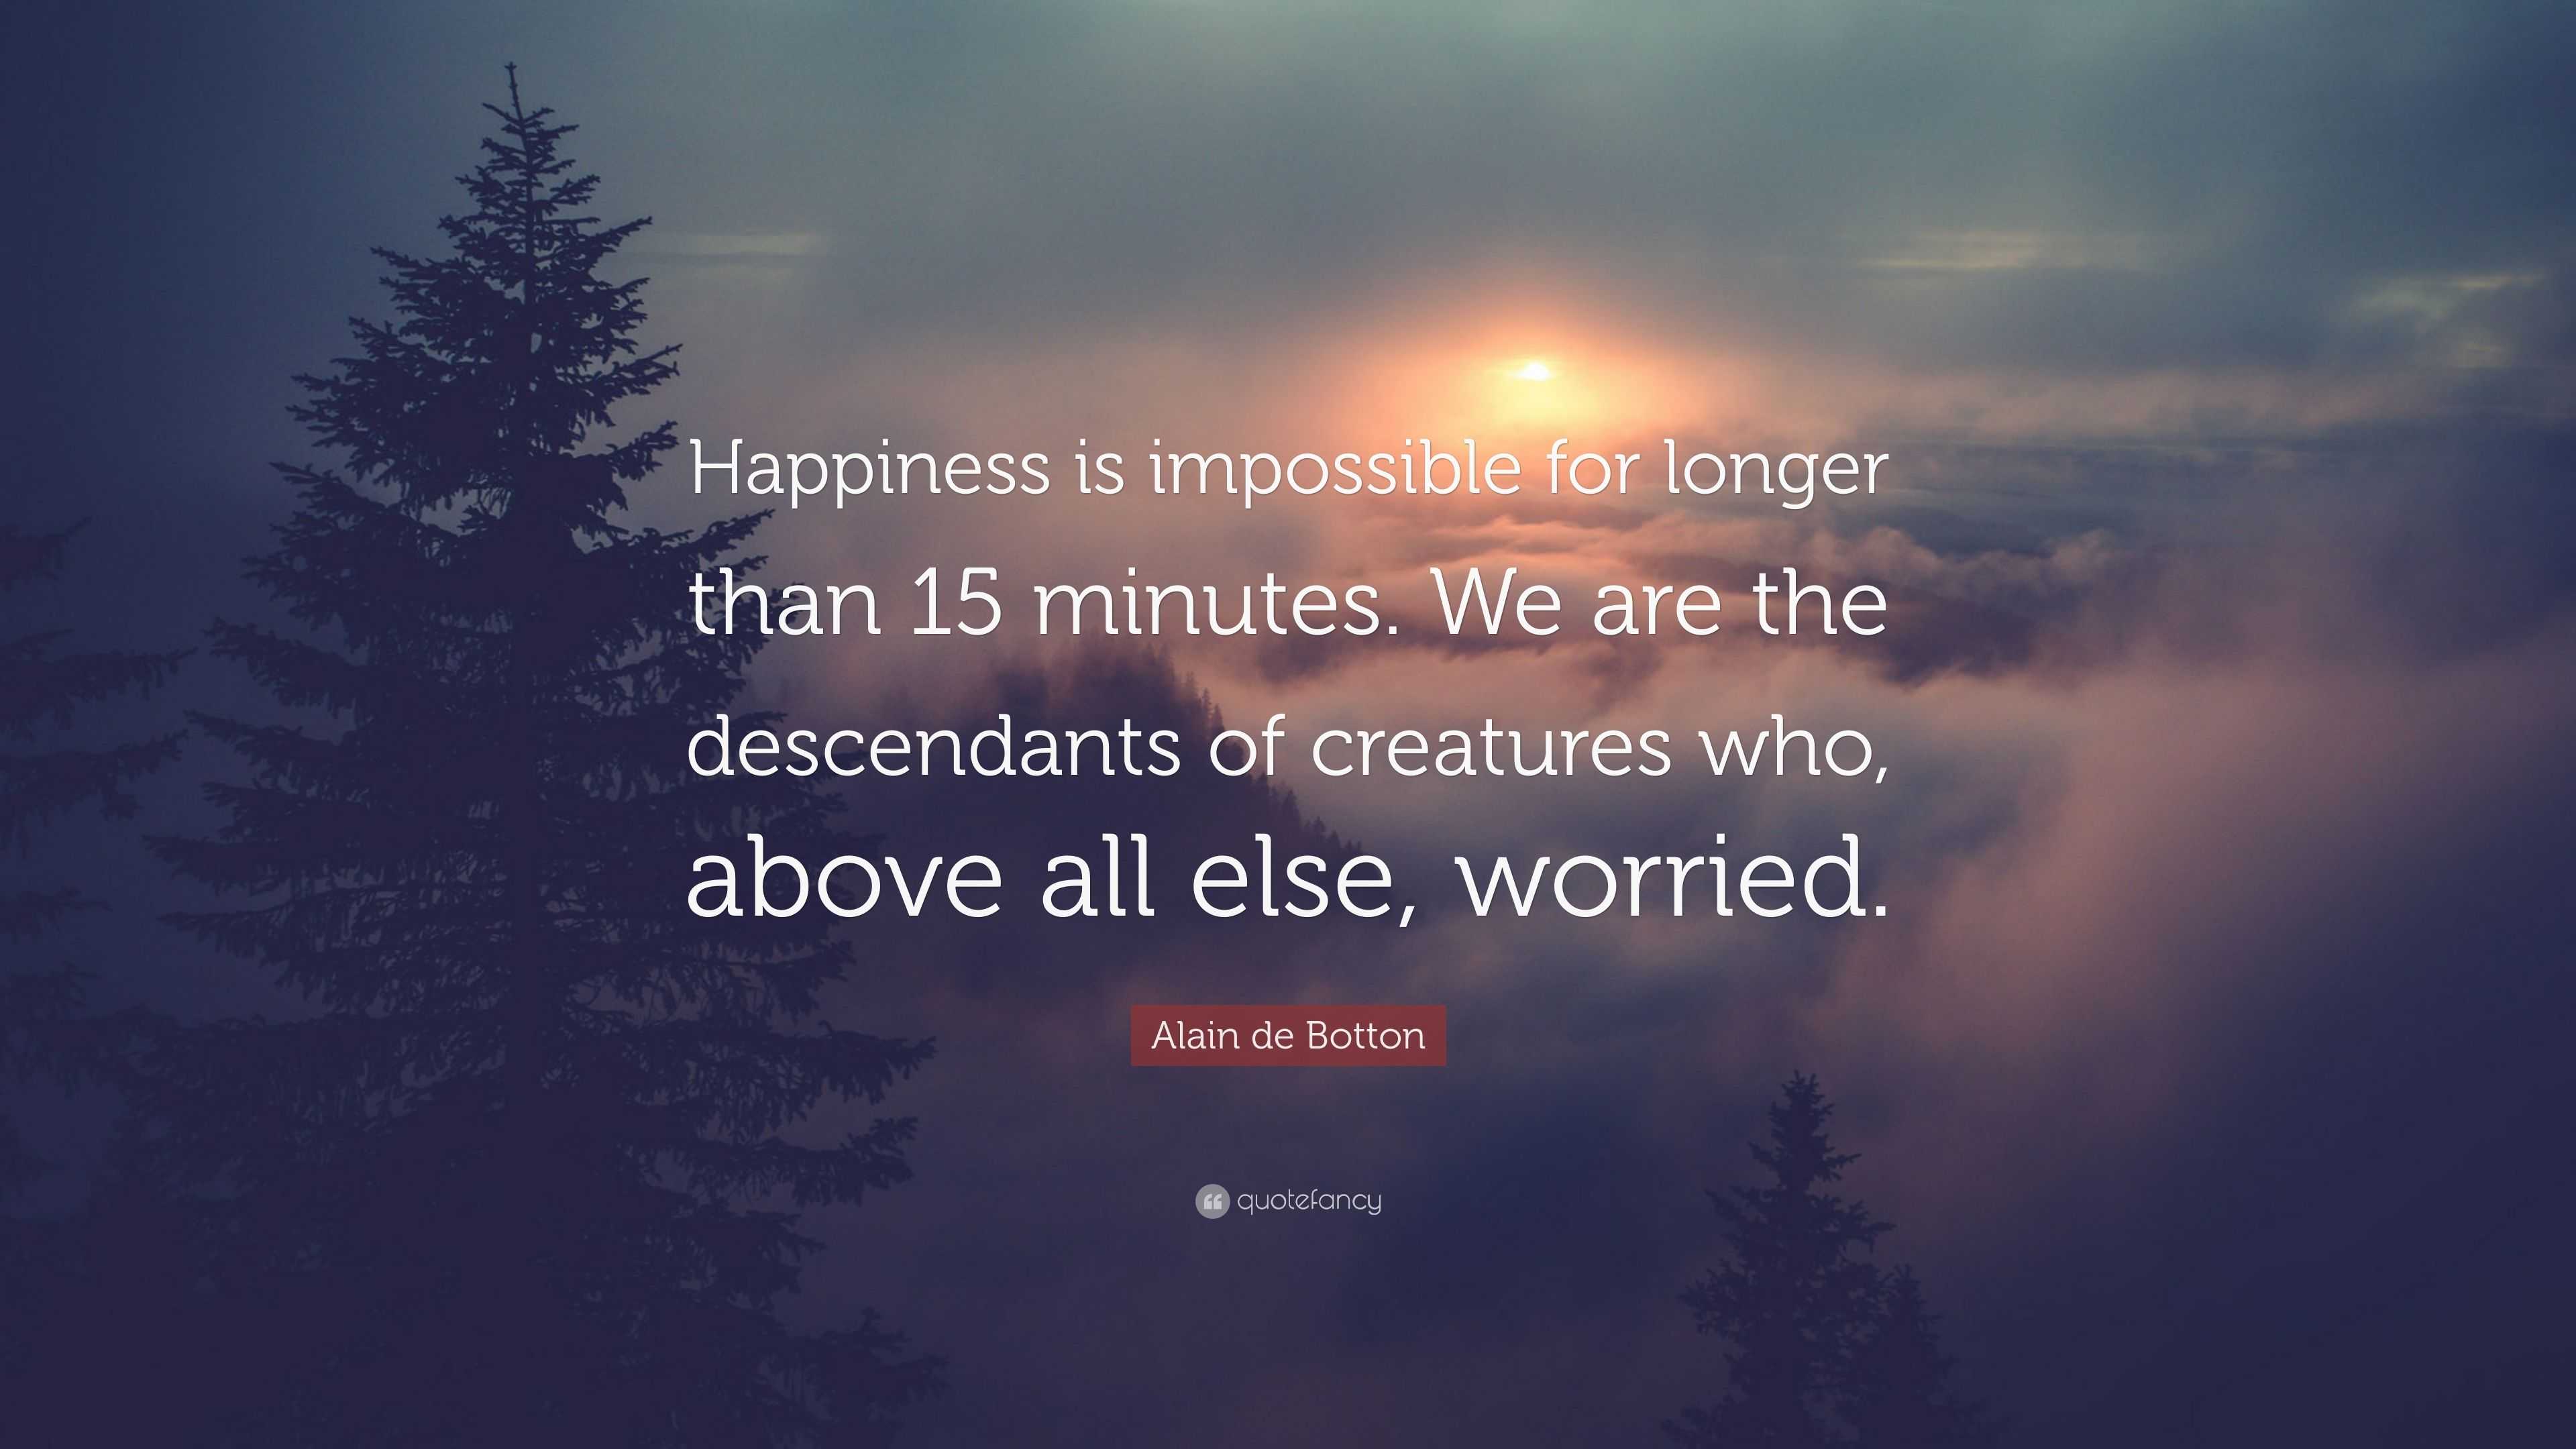 Alain de Botton Quote: “Happiness is impossible for longer than